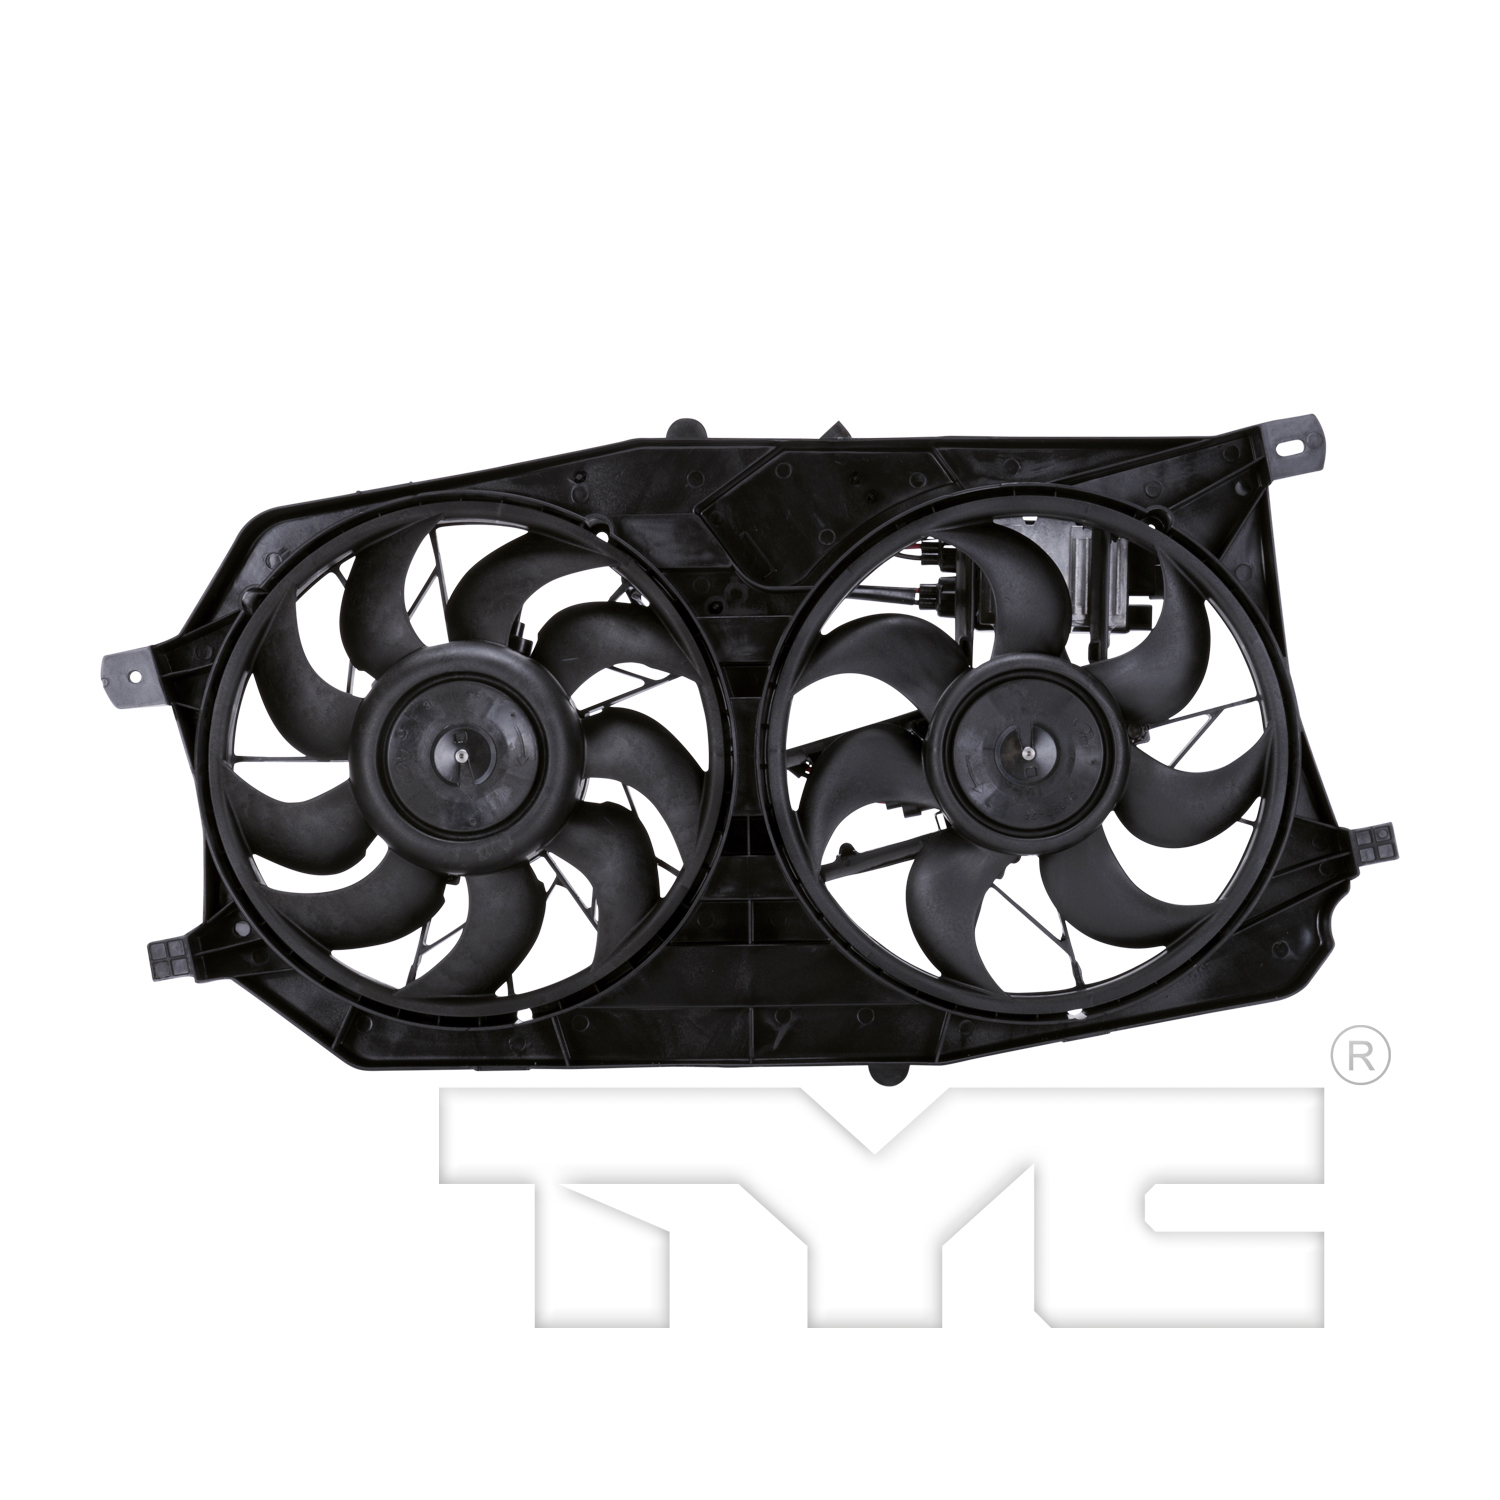 Aftermarket FAN ASSEMBLY/FAN SHROUDS for FORD - FREESTYLE, FREESTYLE,05-07,Radiator cooling fan assy